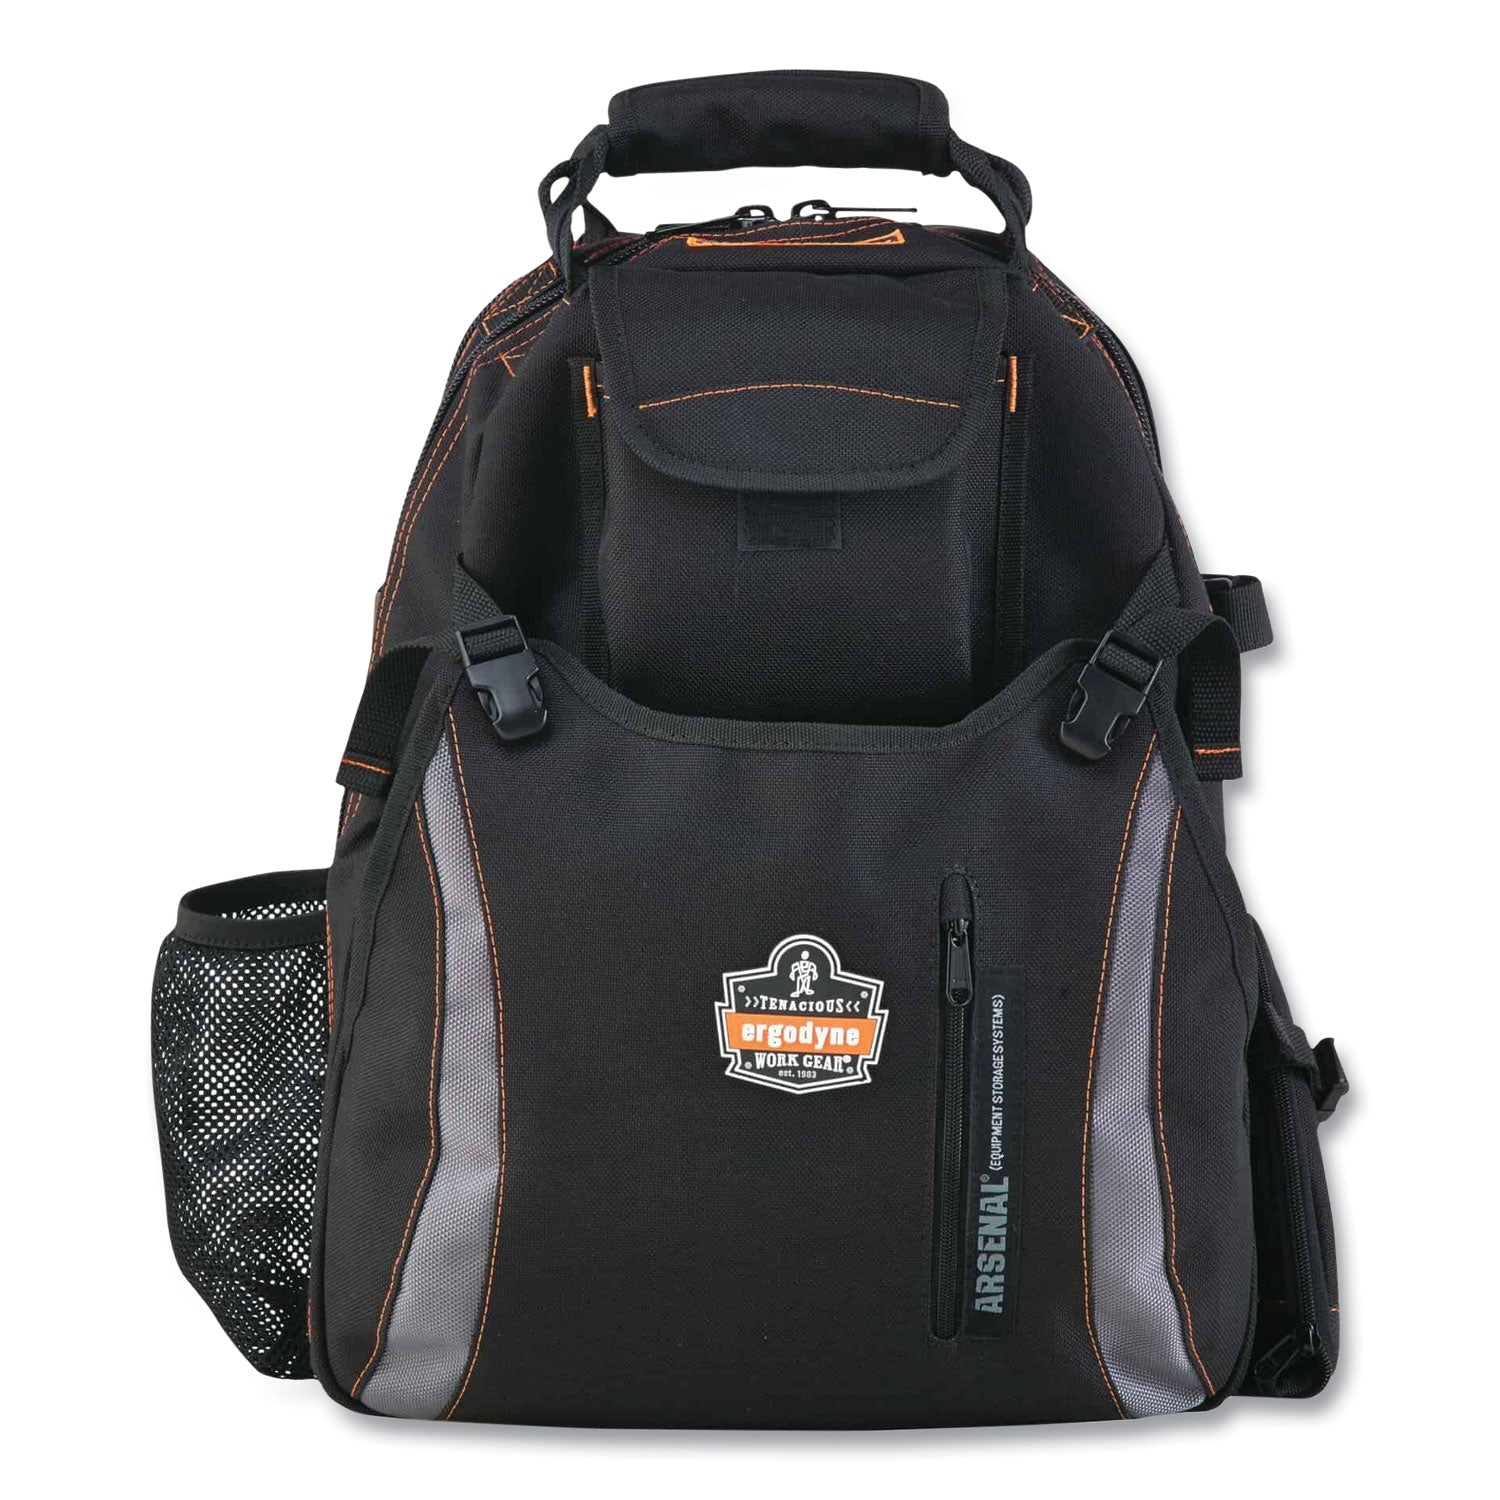 arsenal-5843-tool-backpack-dual-compartment-26-comp-85x135x18-ballistic-polyester-black-grayships-in-1-3-business-days_ego13743 - 1